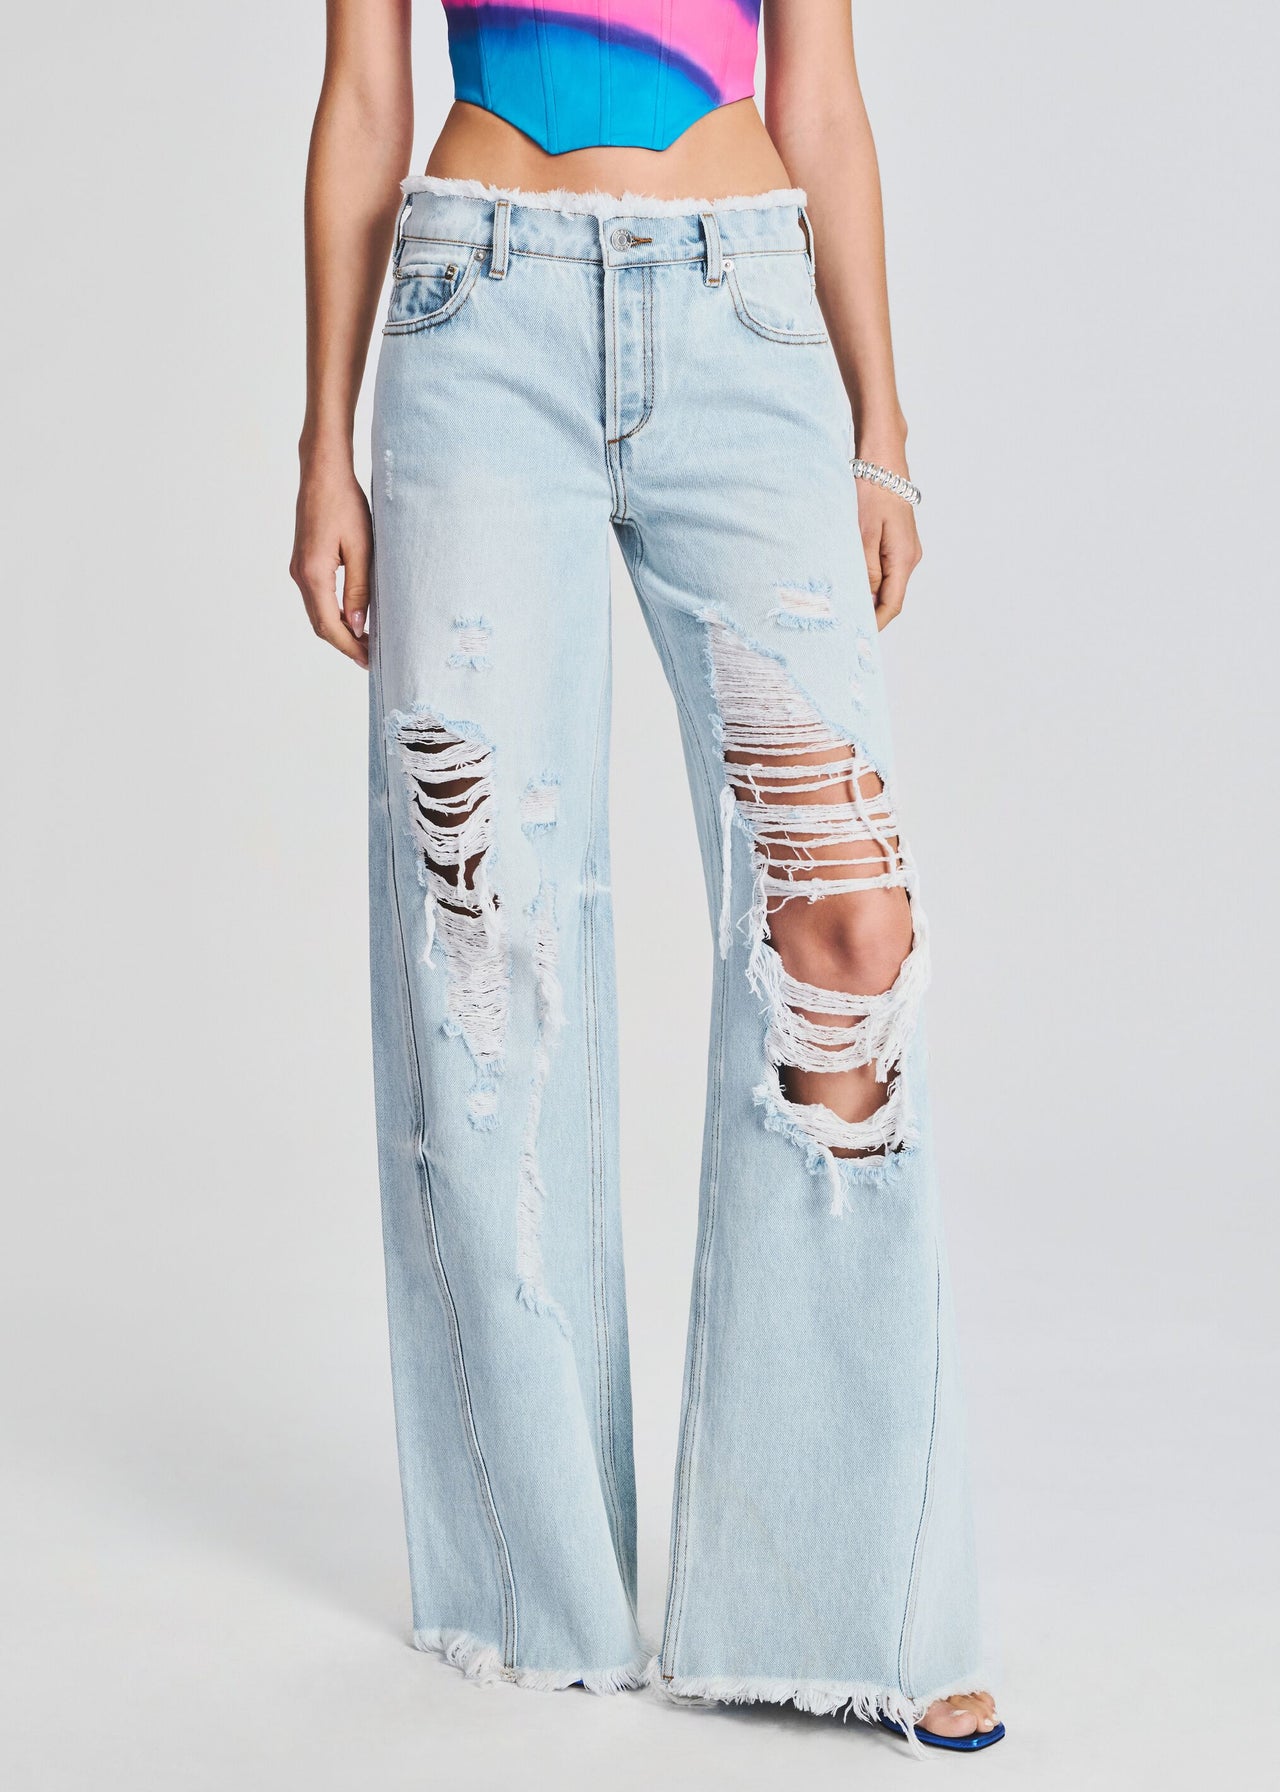 High Rise Flare Distressed Jeans Black - Southern Fashion Boutique Bliss